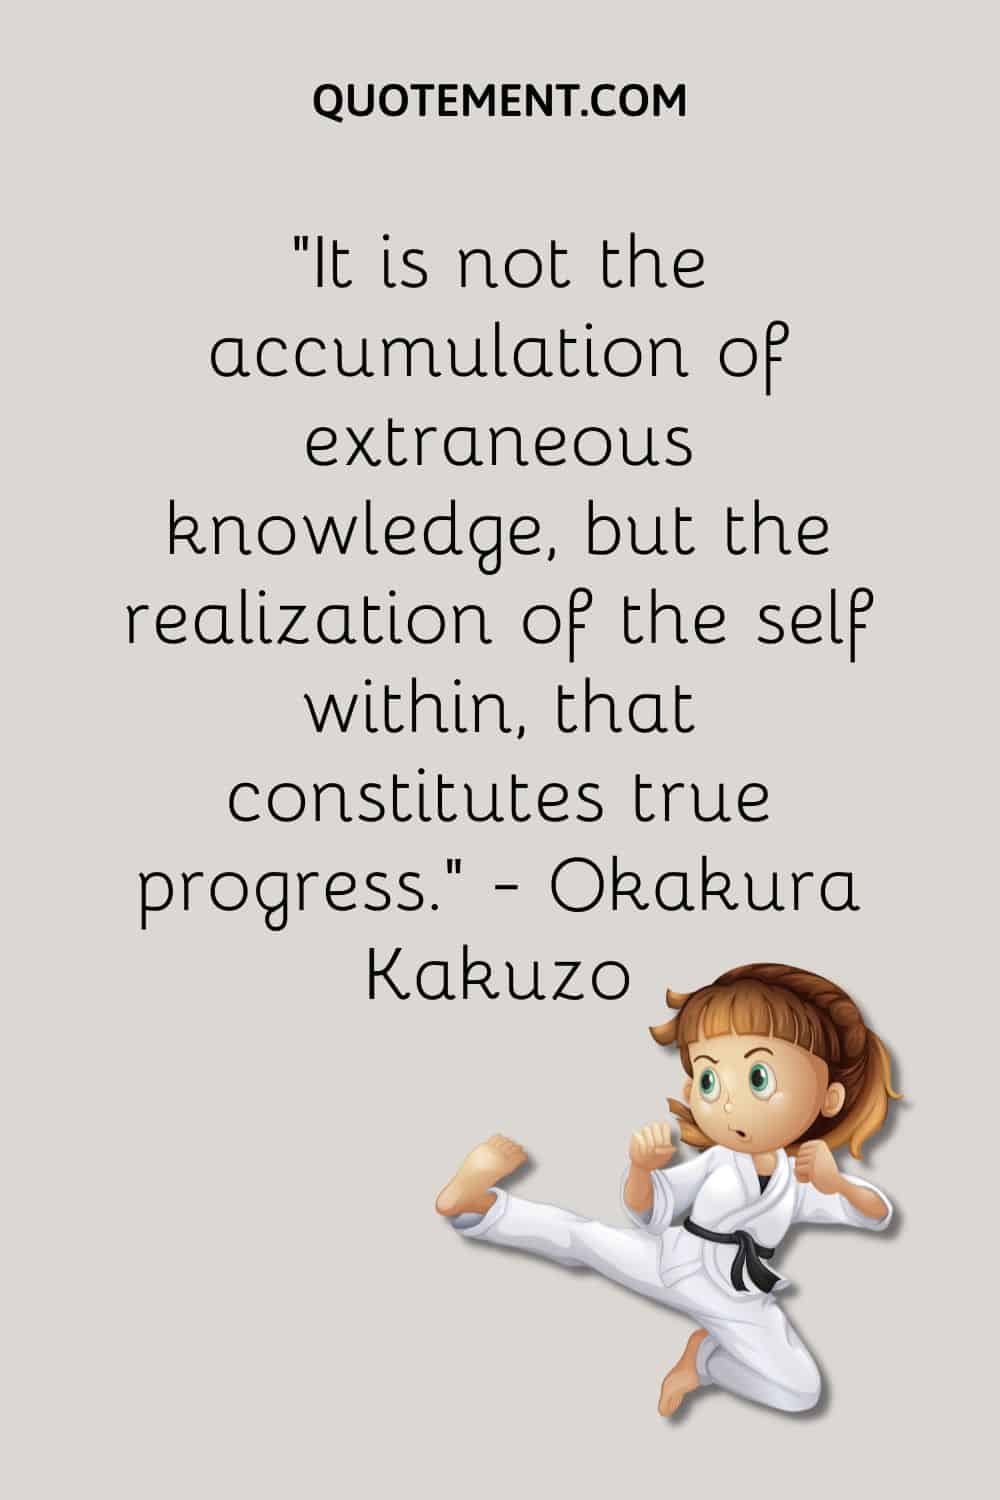 It is not the accumulation of extraneous knowledge, but the realization of the self within, that constitutes true progress